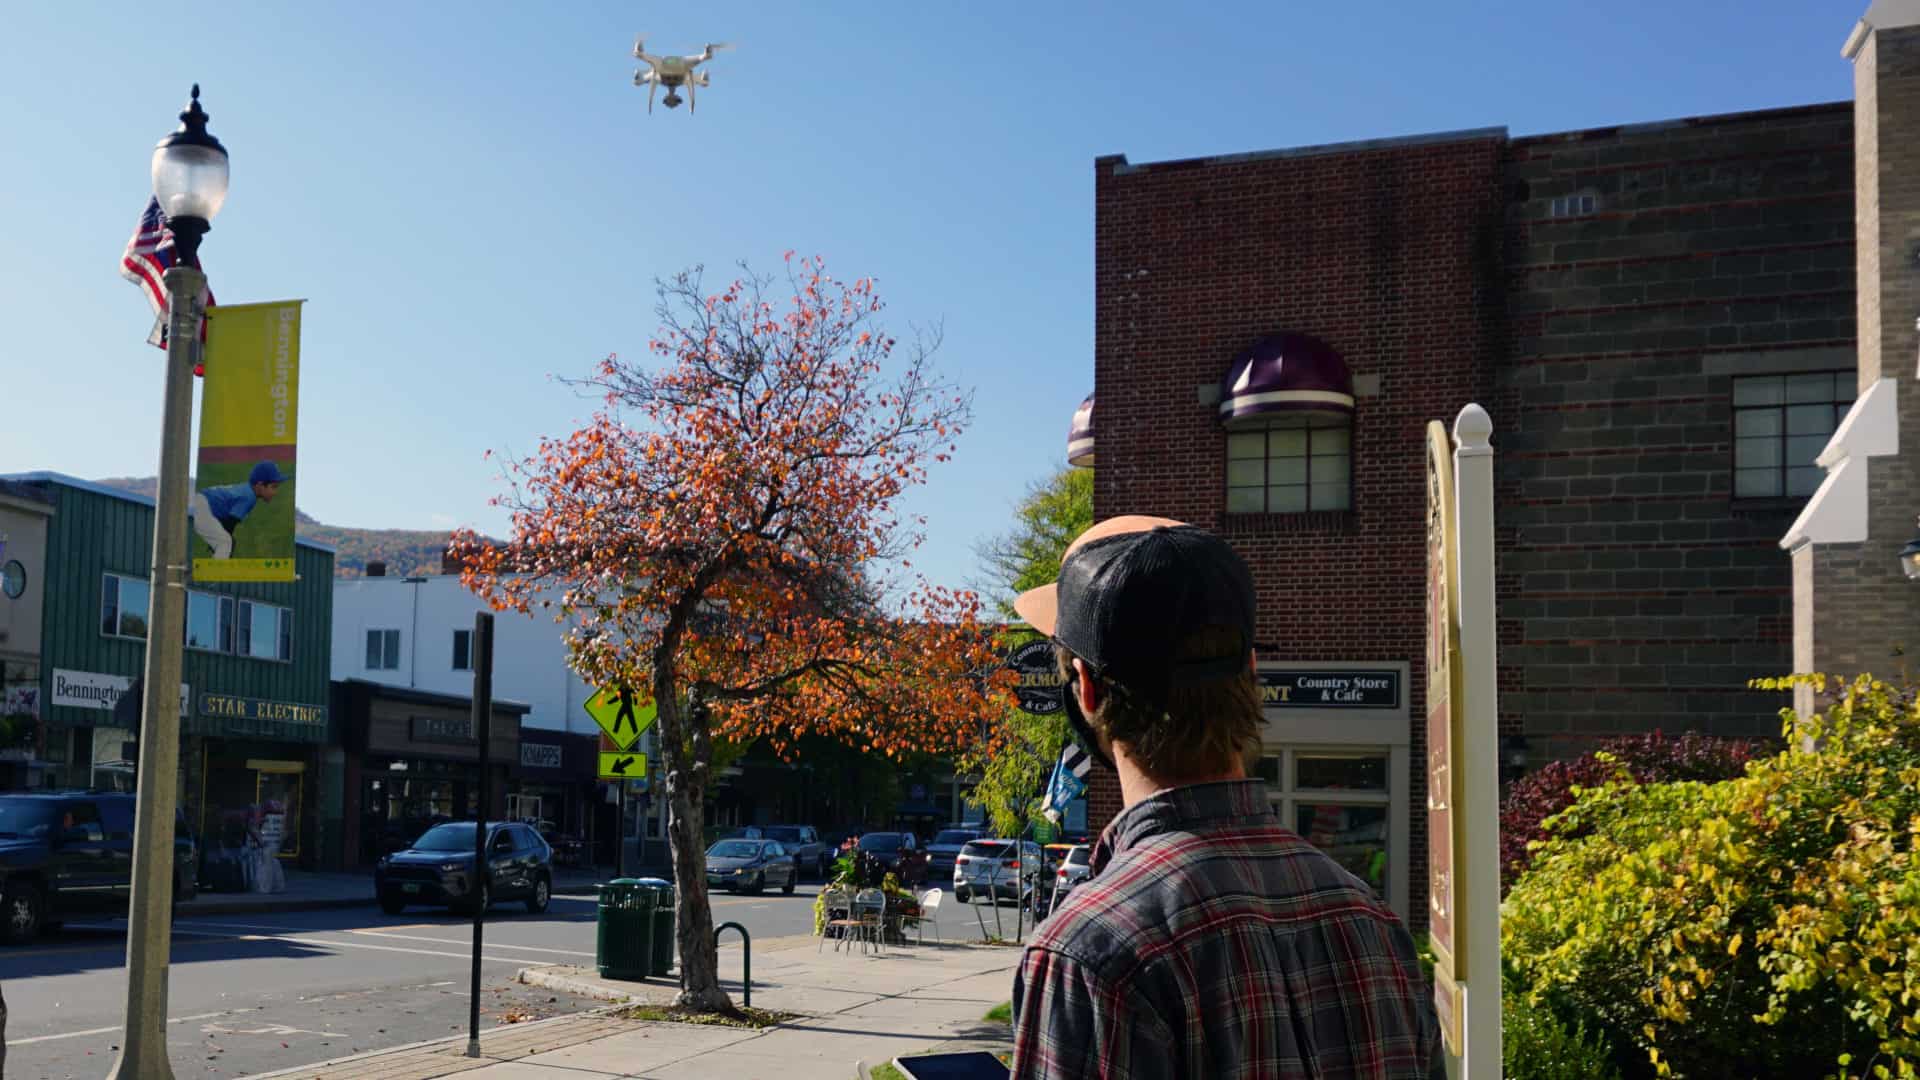 A photographer flies a drone in downtown Bennington, Vt. Press photo courtesy of the Southwestern Vermont Chamber of Commerce